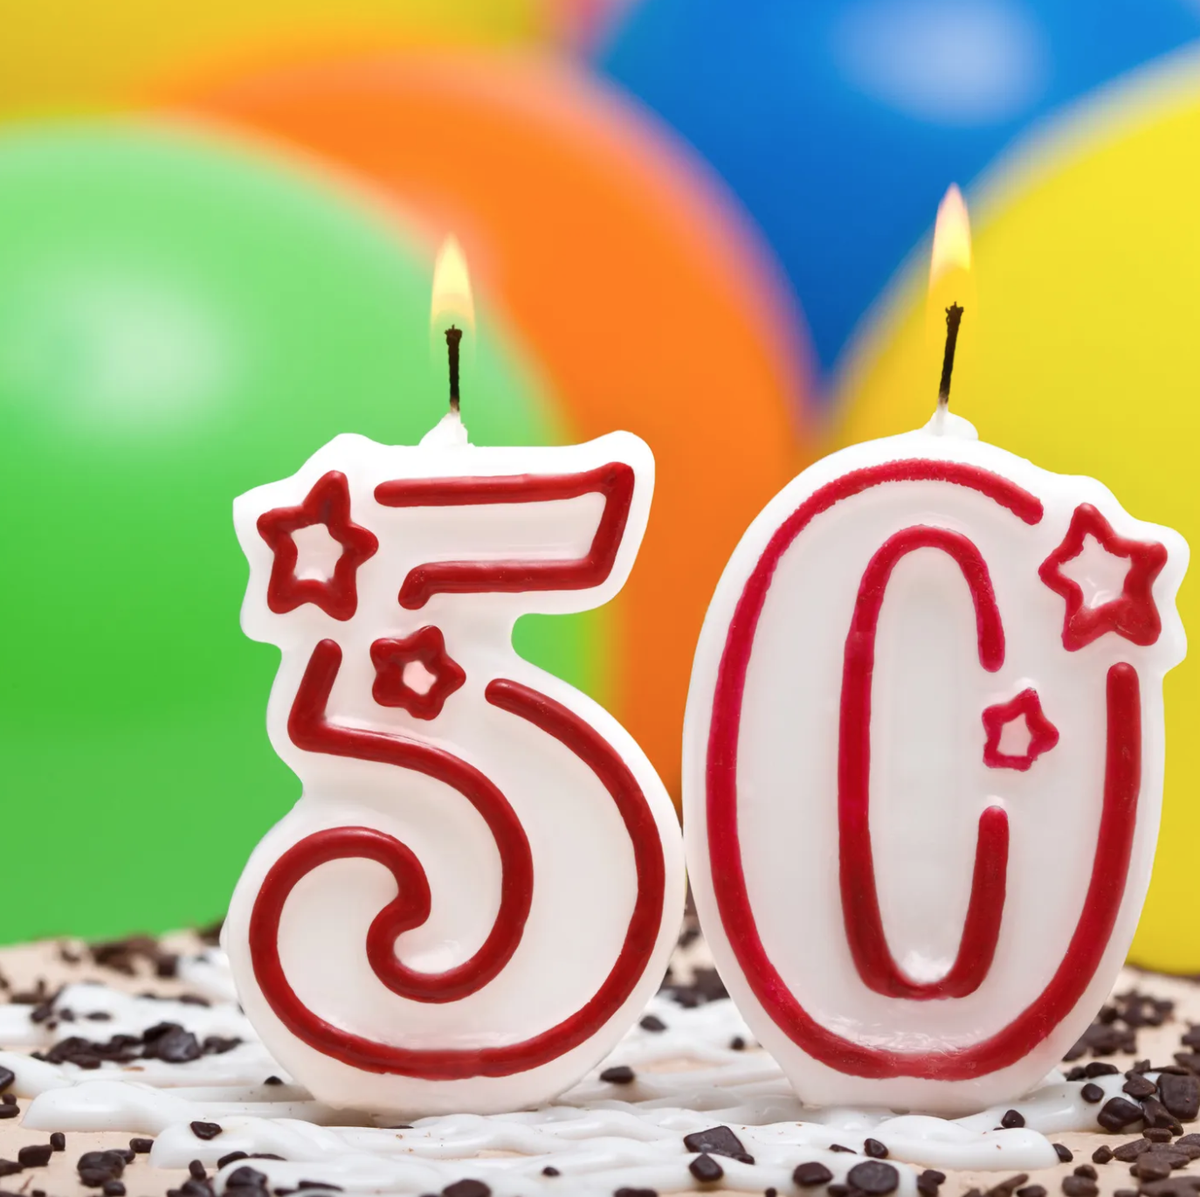 50th Birthday Decorations For Woman Men Adult Party Set 50 anni Happy  Birthday Banner 50 forniture